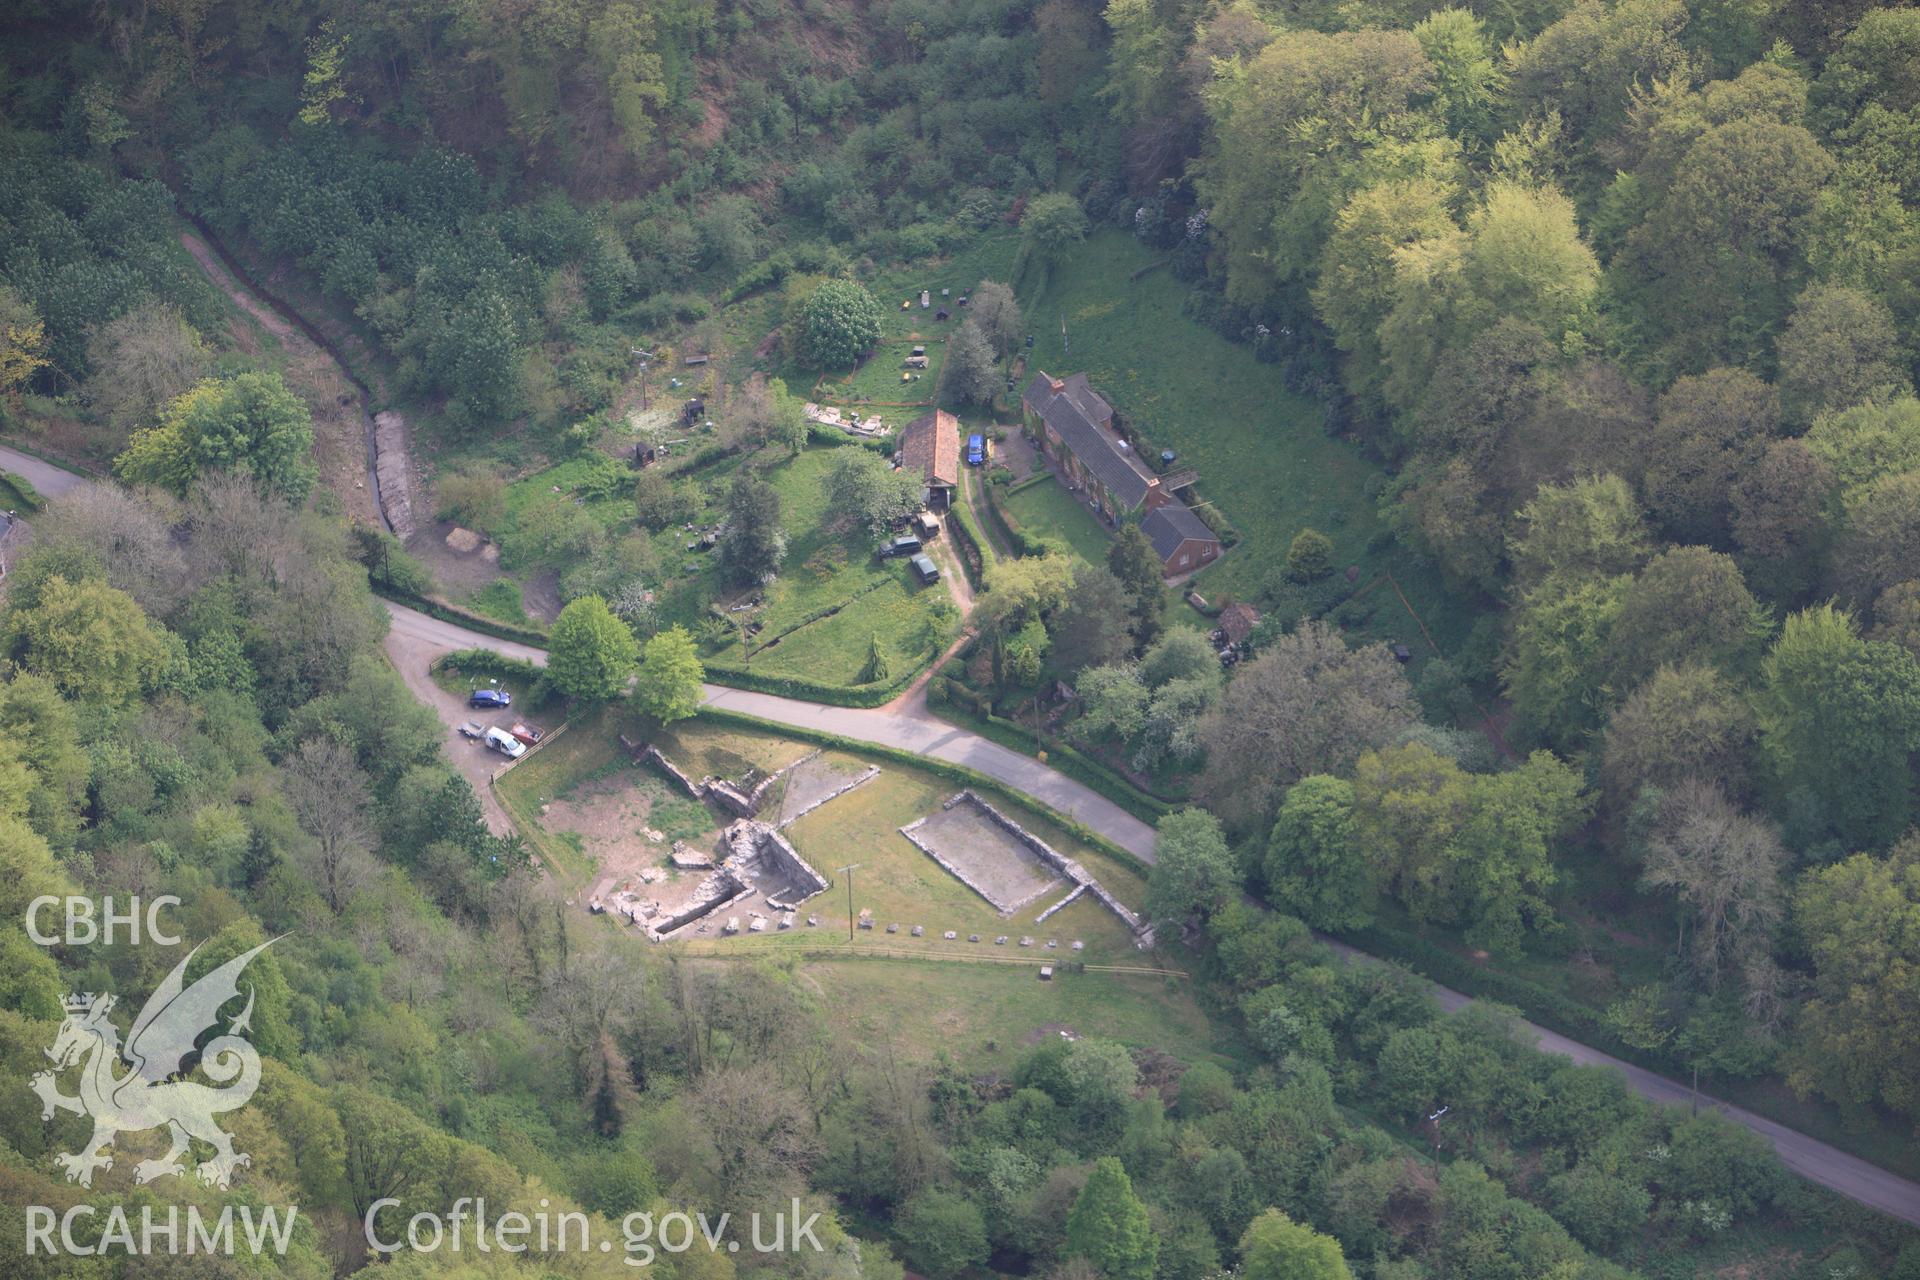 RCAHMW colour oblique photograph of Blast Furnace, Tintern. Taken by Toby Driver on 26/04/2011.